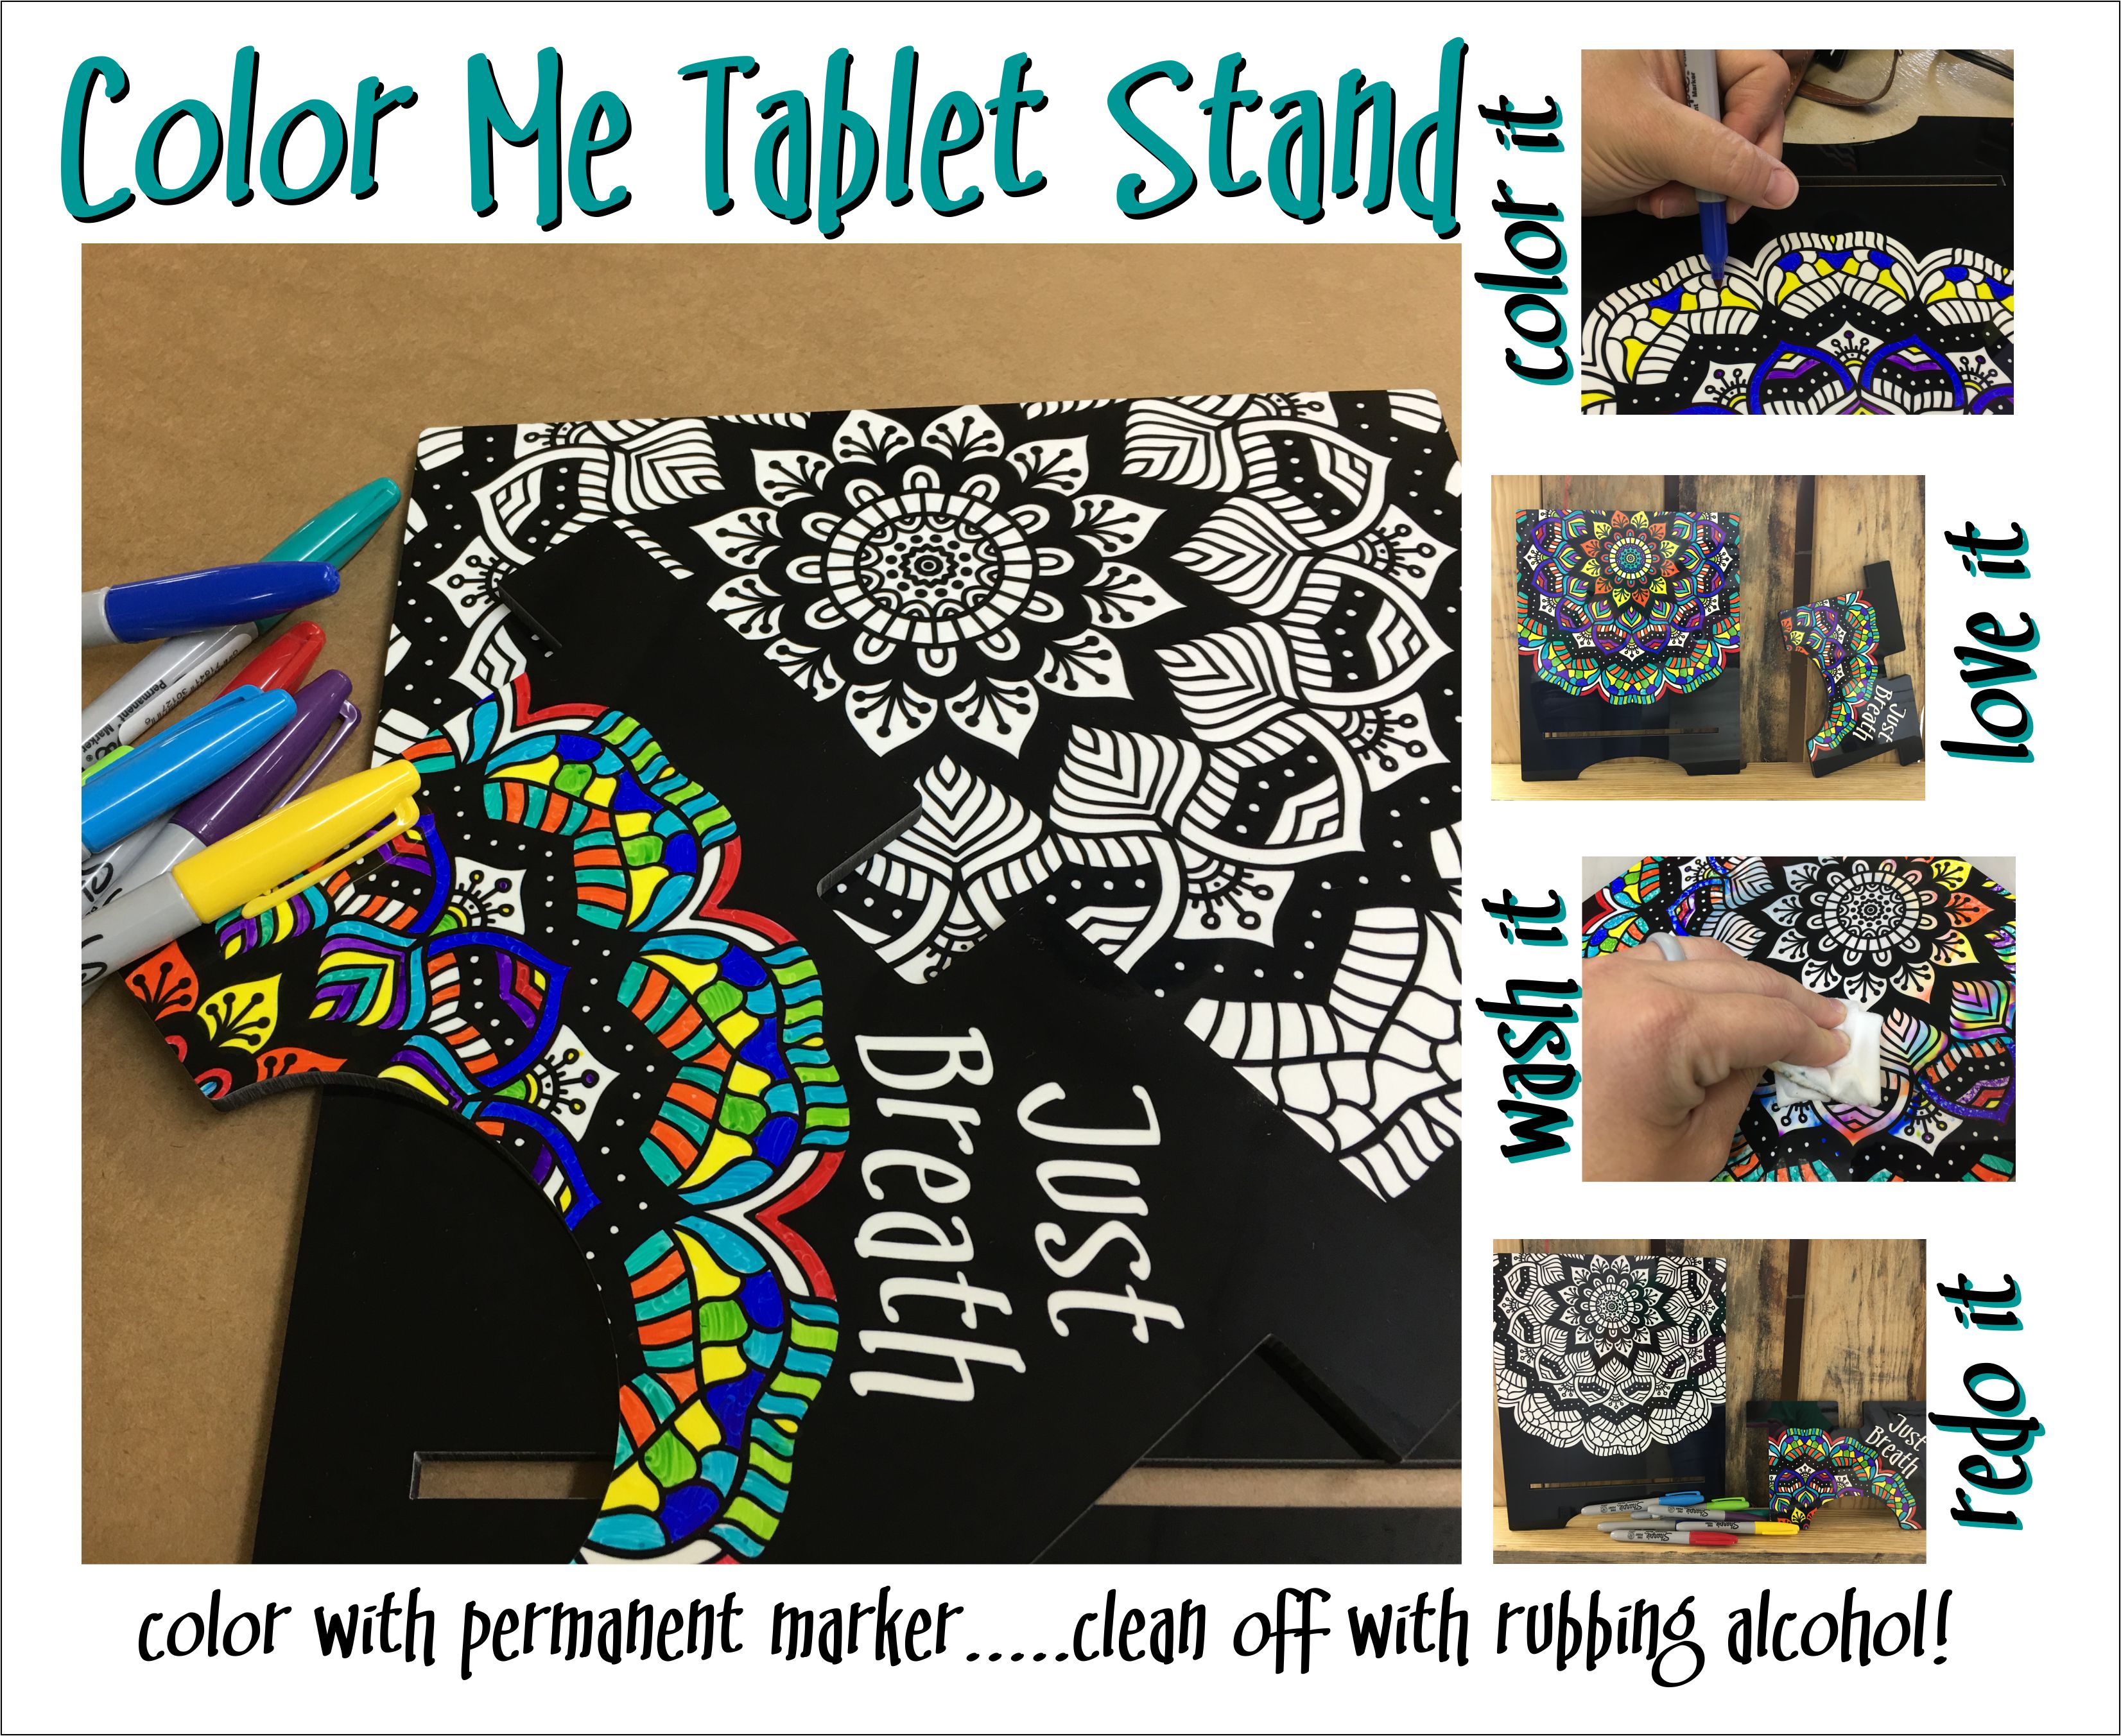 Color Me Tablet Stand made with sublimation printing